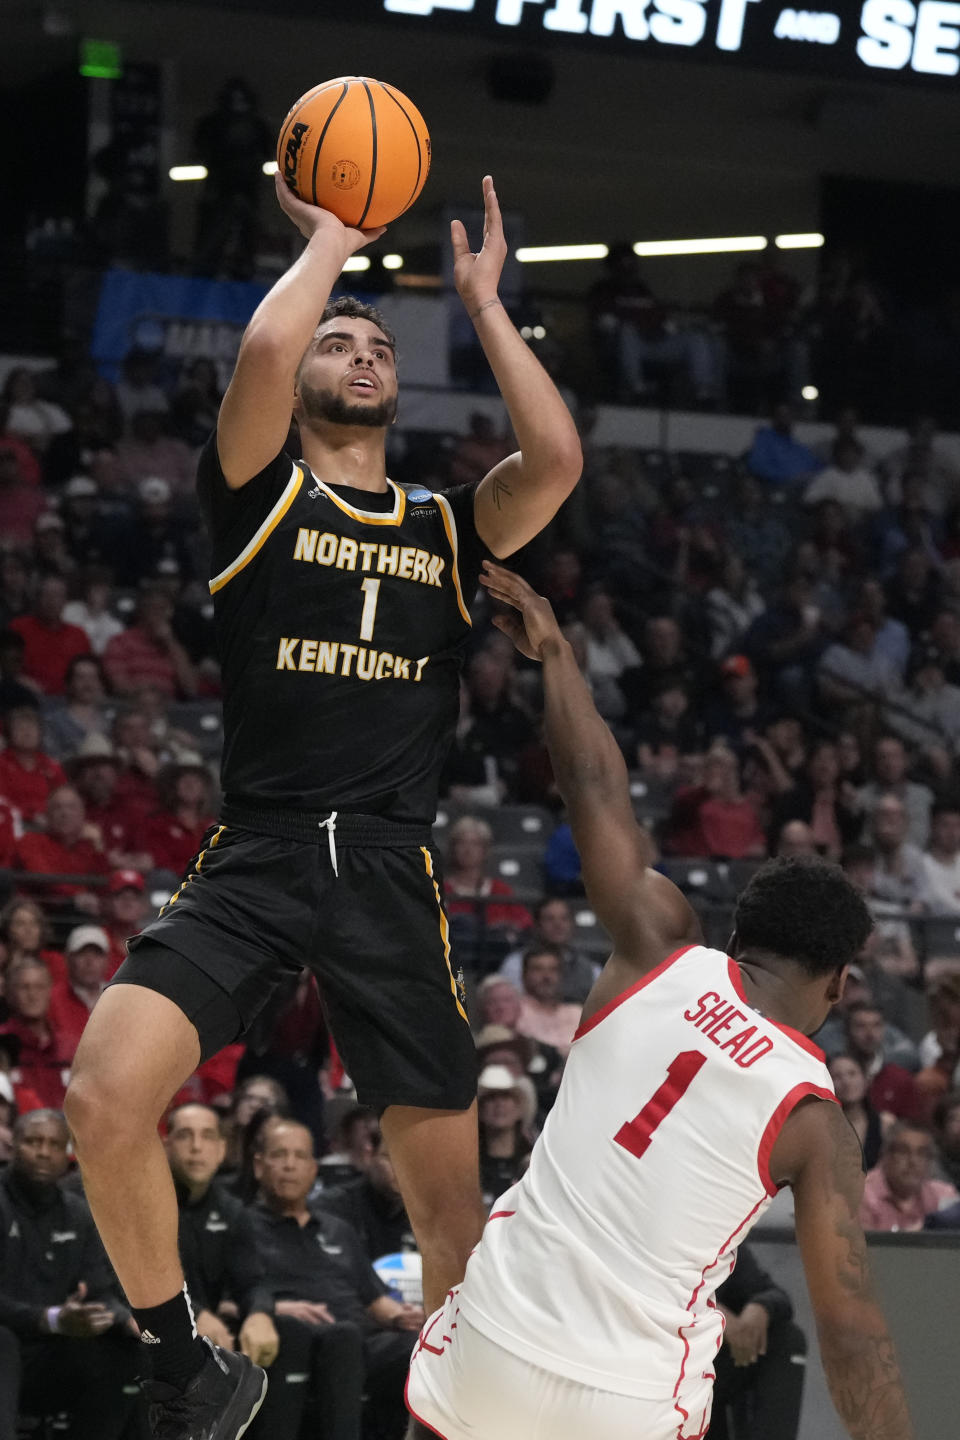 Northern Kentucky guard Trey Robinson (1) shoots over Houston guard Jamal Shead (1) during the first half of a first-round college basketball game in the men's NCAA Tournament in Birmingham, Ala., Thursday, March 16, 2023. (AP Photo/Rogelio V. Solis)